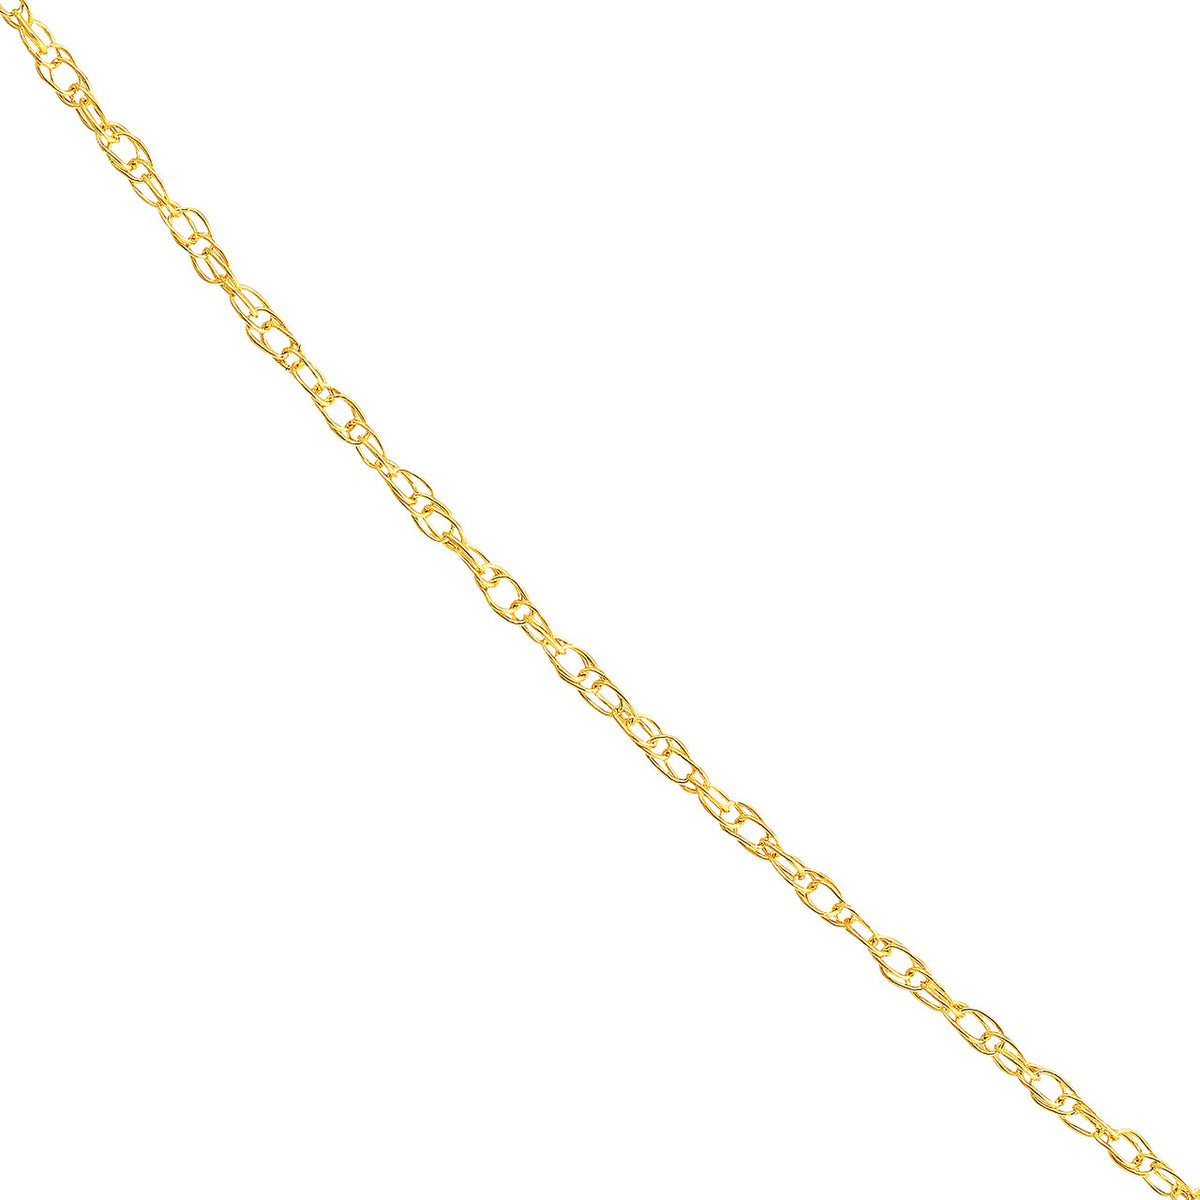 14K Yellow Gold or White Gold 1.2mm Pendant Rope Chain Necklace with Lobster Lock